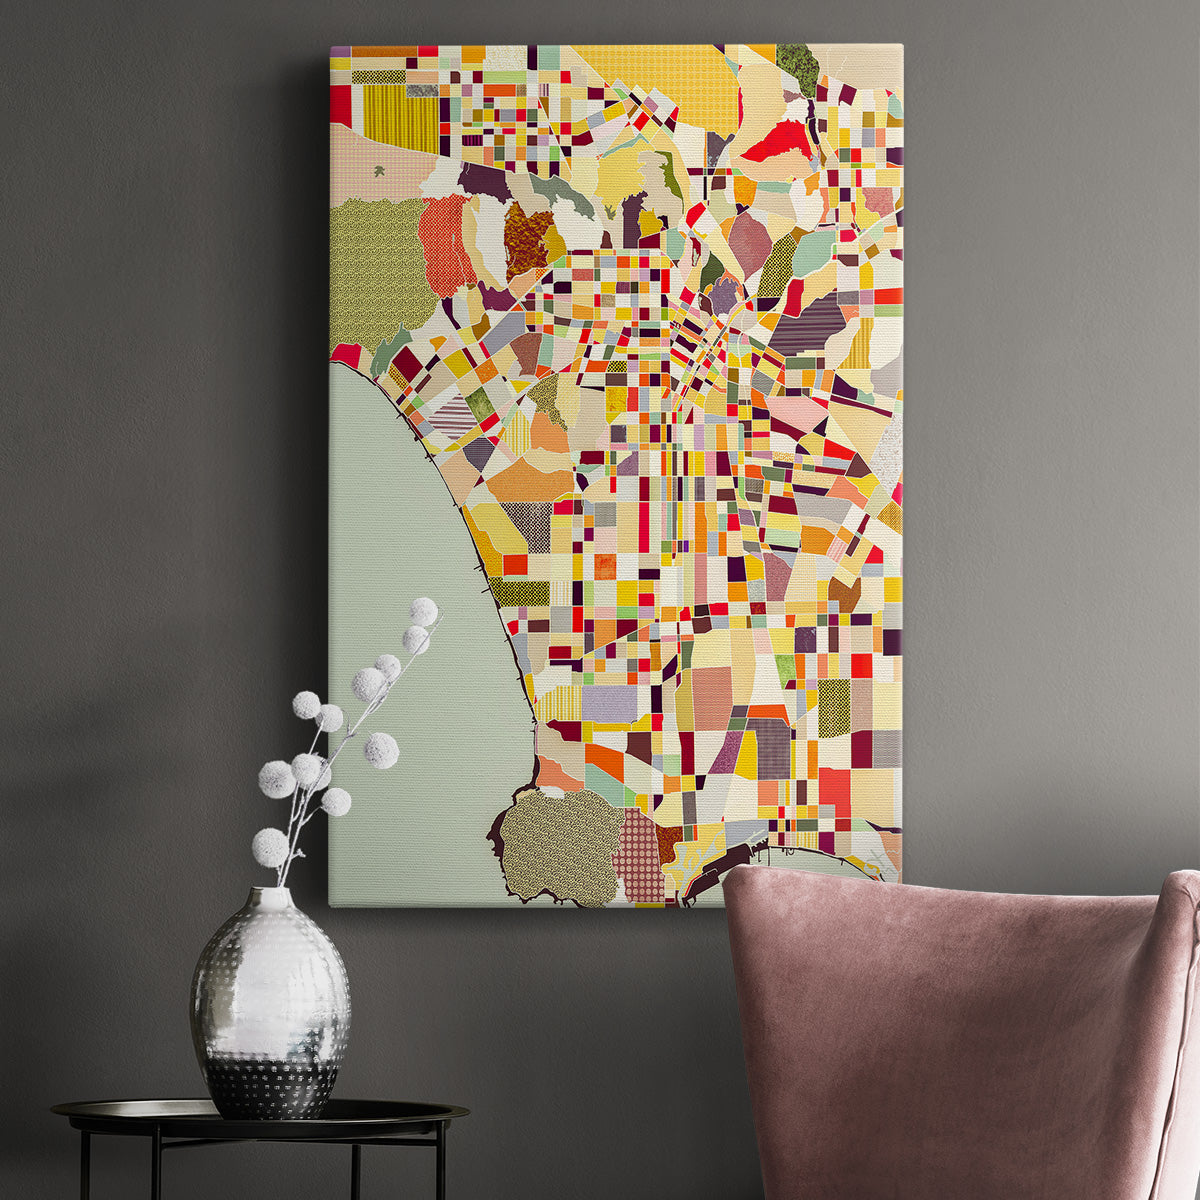 Modern Los Angeles Map Premium Gallery Wrapped Canvas - Ready to Hang